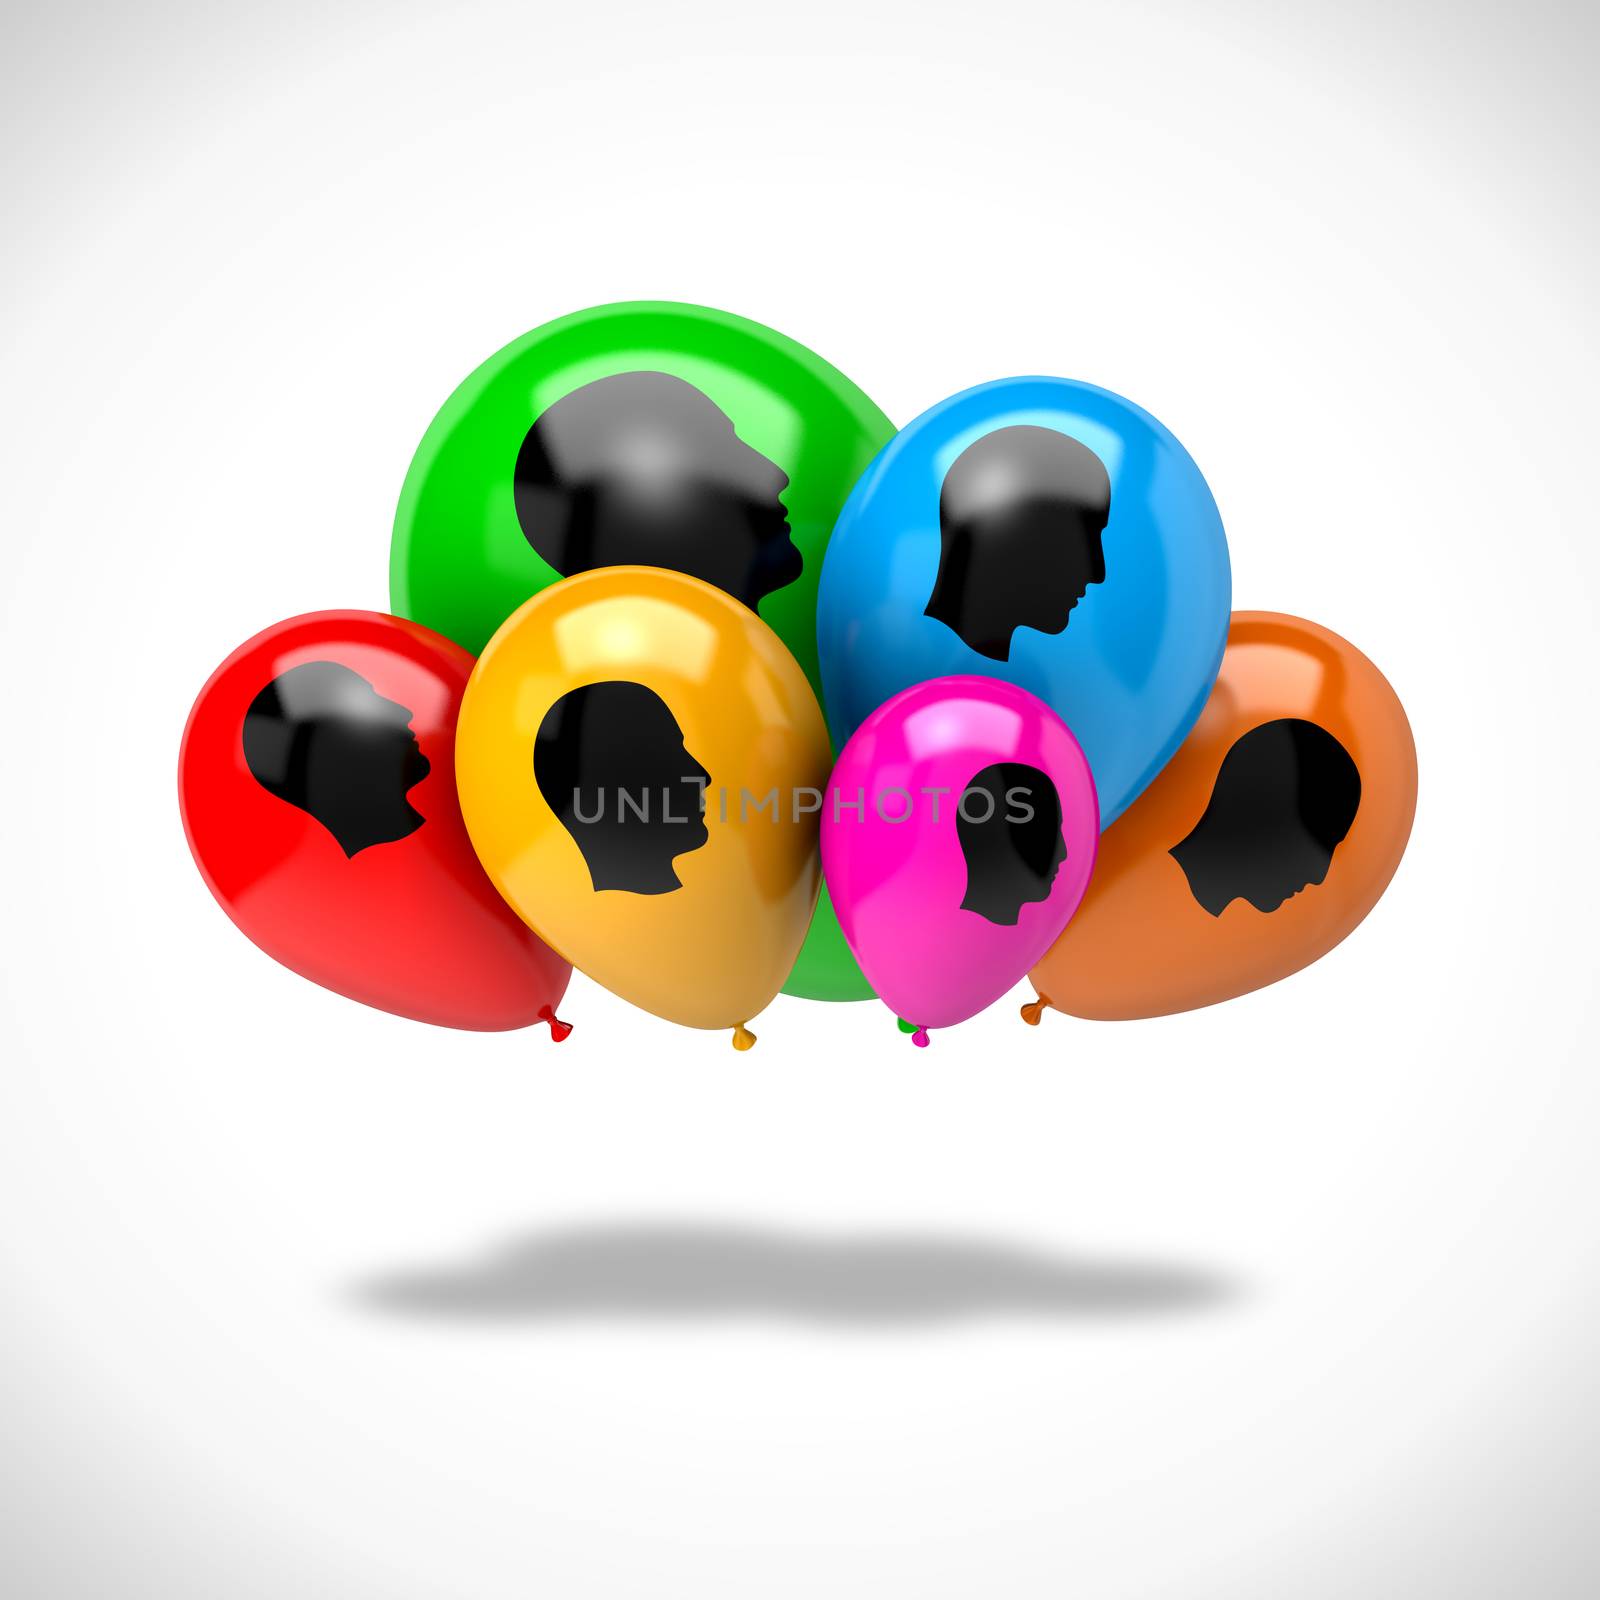 Bunch of Vibrant Color Balloons with Head Profile Symbols on White Background 3D Illustration, Cloud Computing Concept